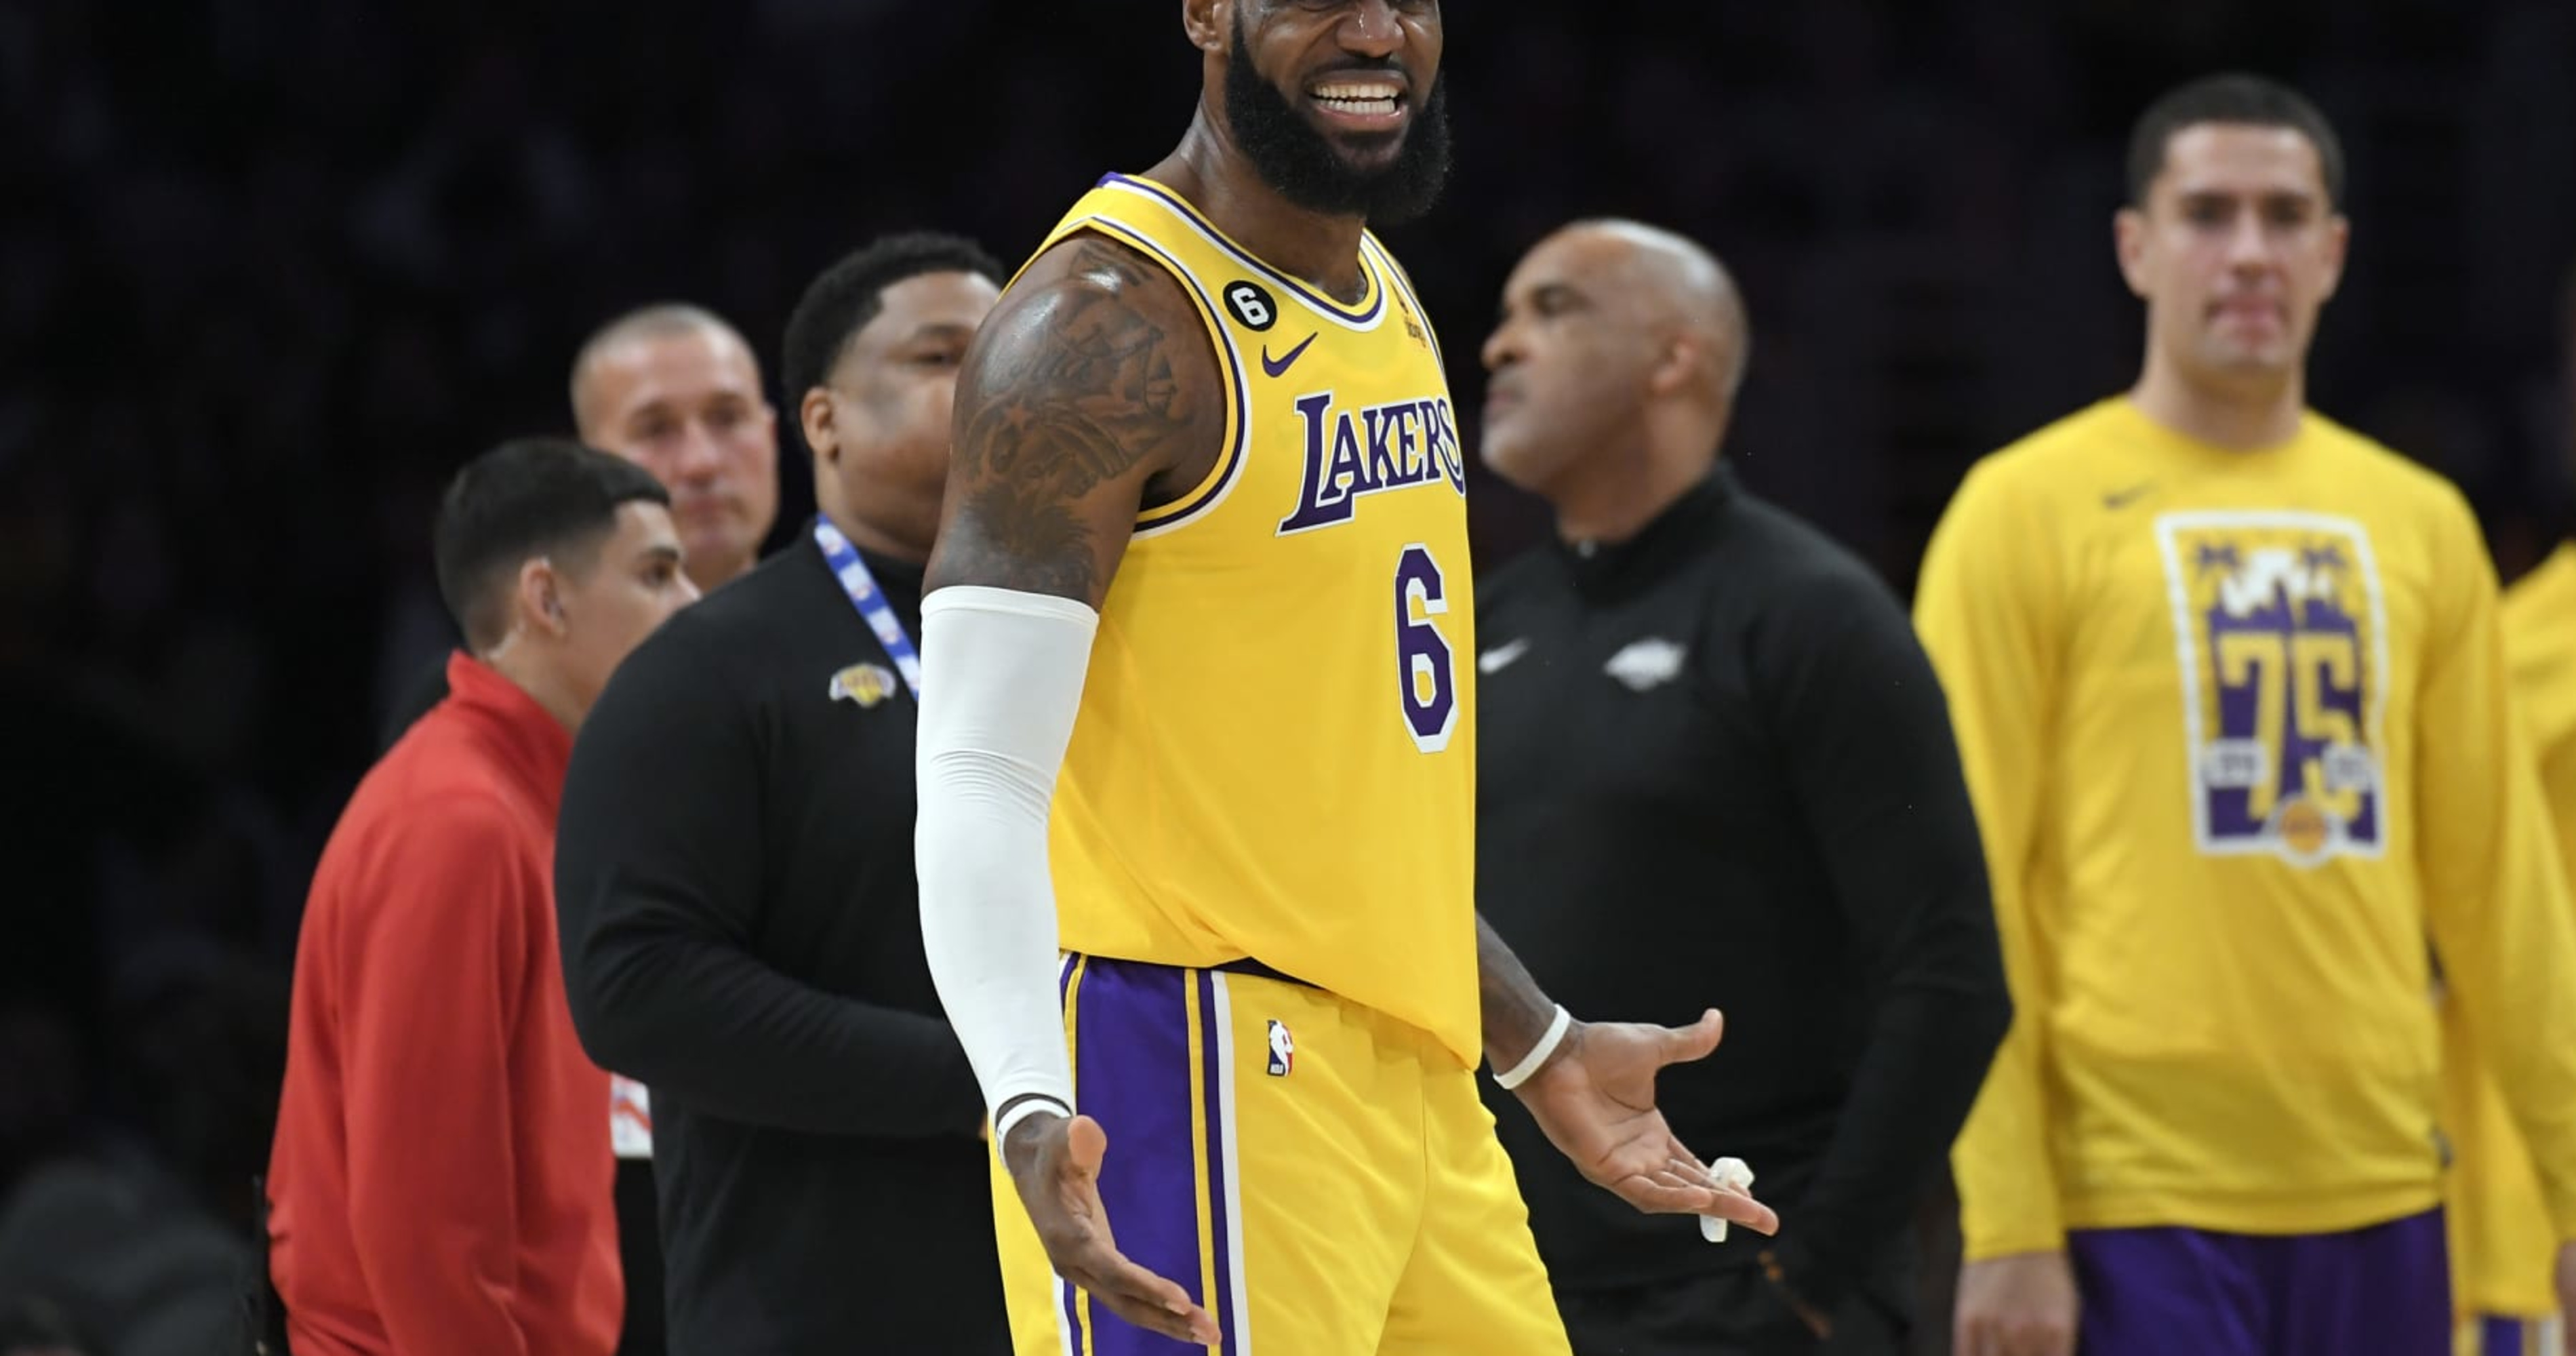 Skip Bayless labels LeBron James all-time pathetic after Lakers